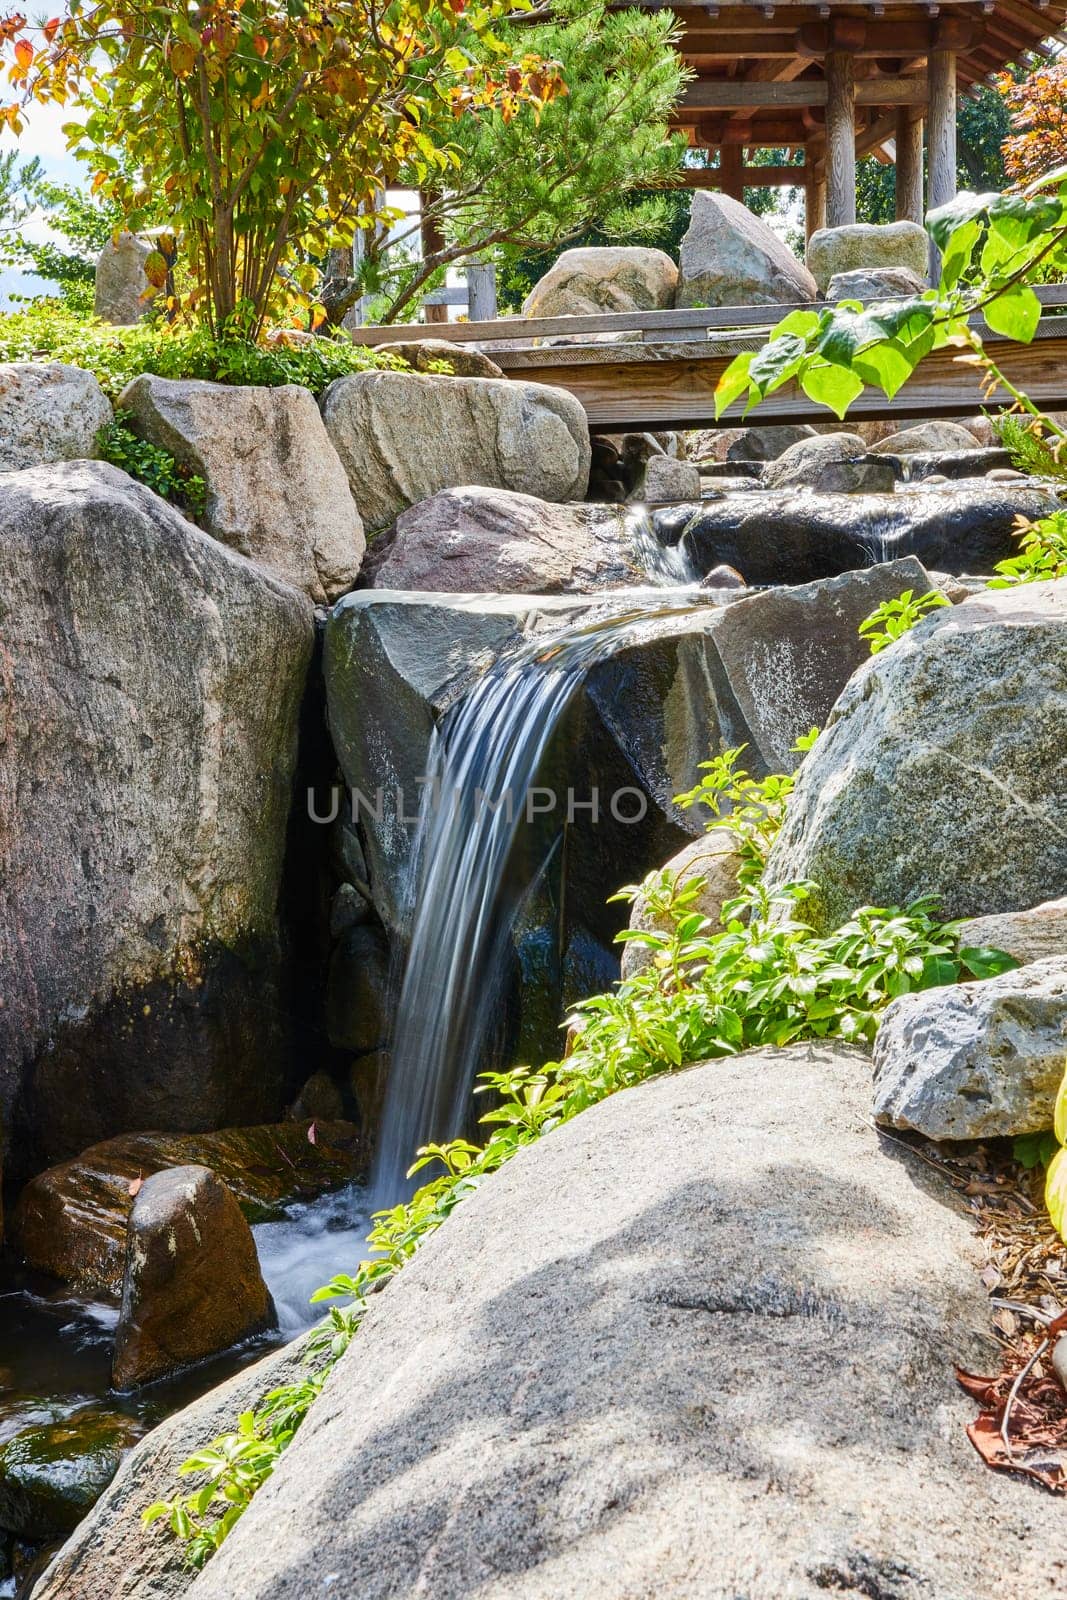 Tranquil Garden Waterfall and Pavilion Retreat by njproductions